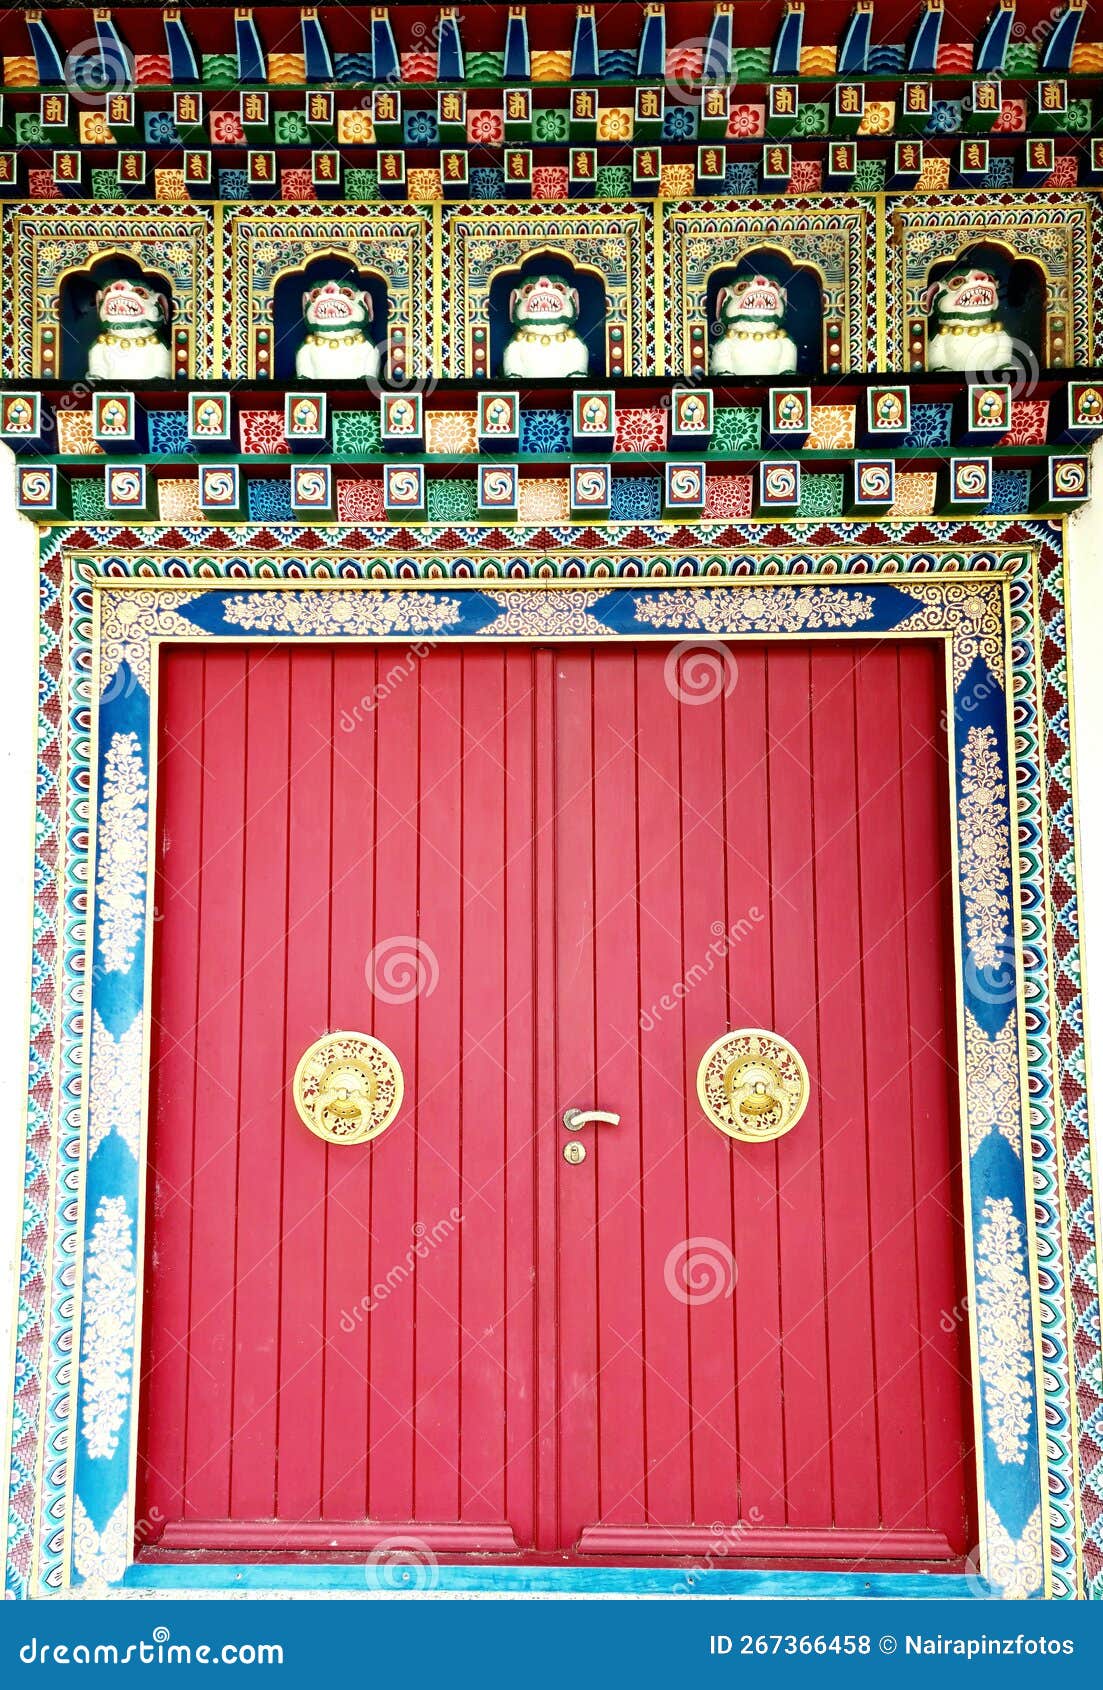 large red door with gold handles statues of temple guardian dogs